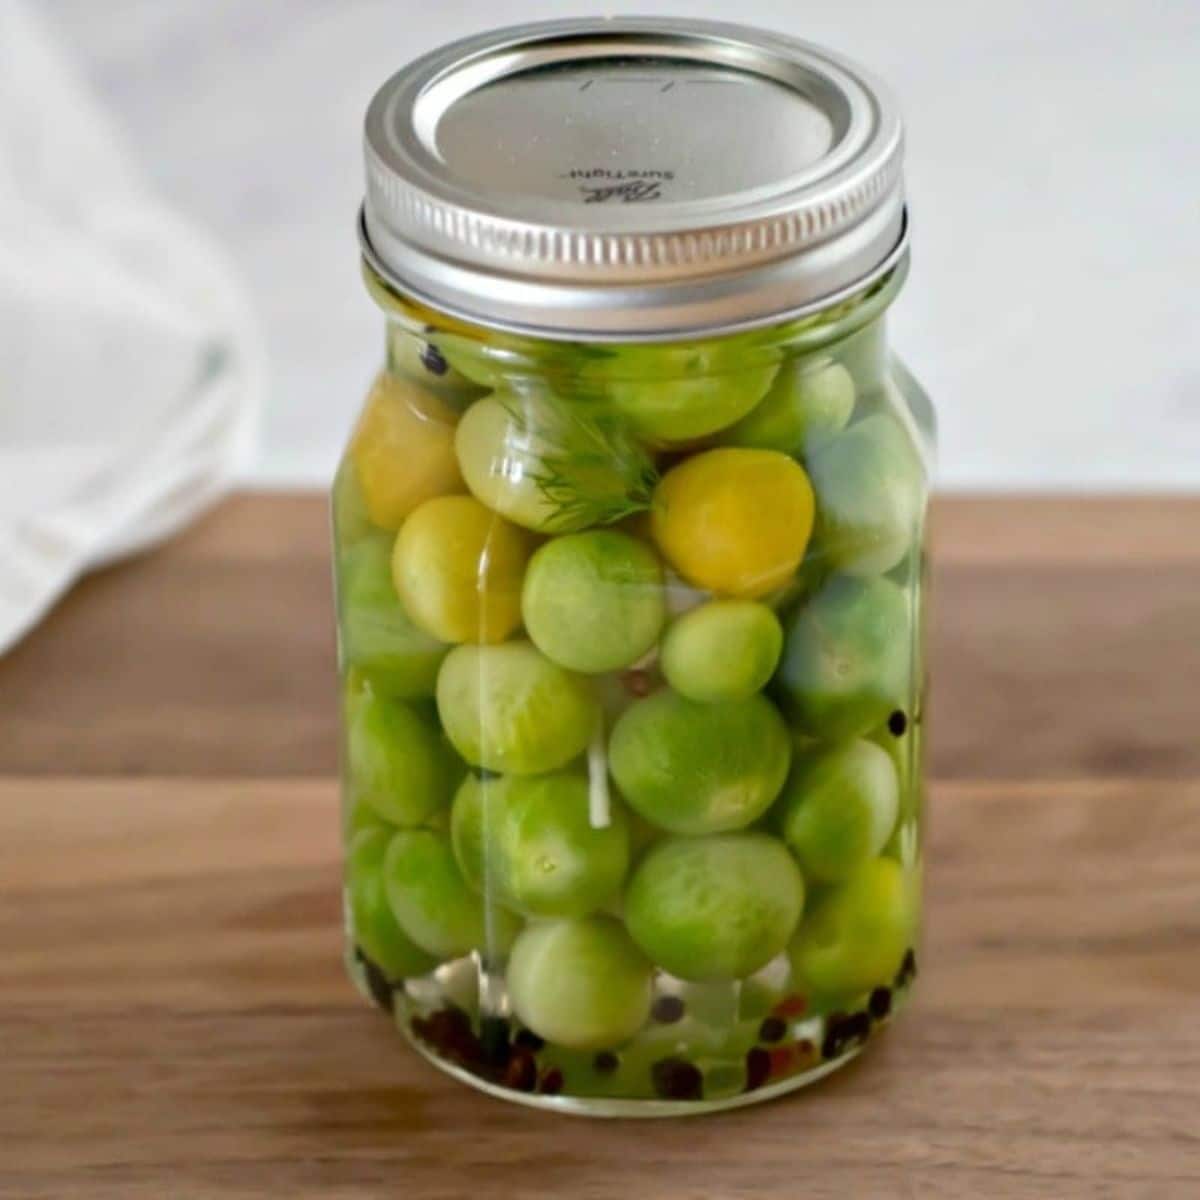 Pickled green tomatoes in a glass jar.